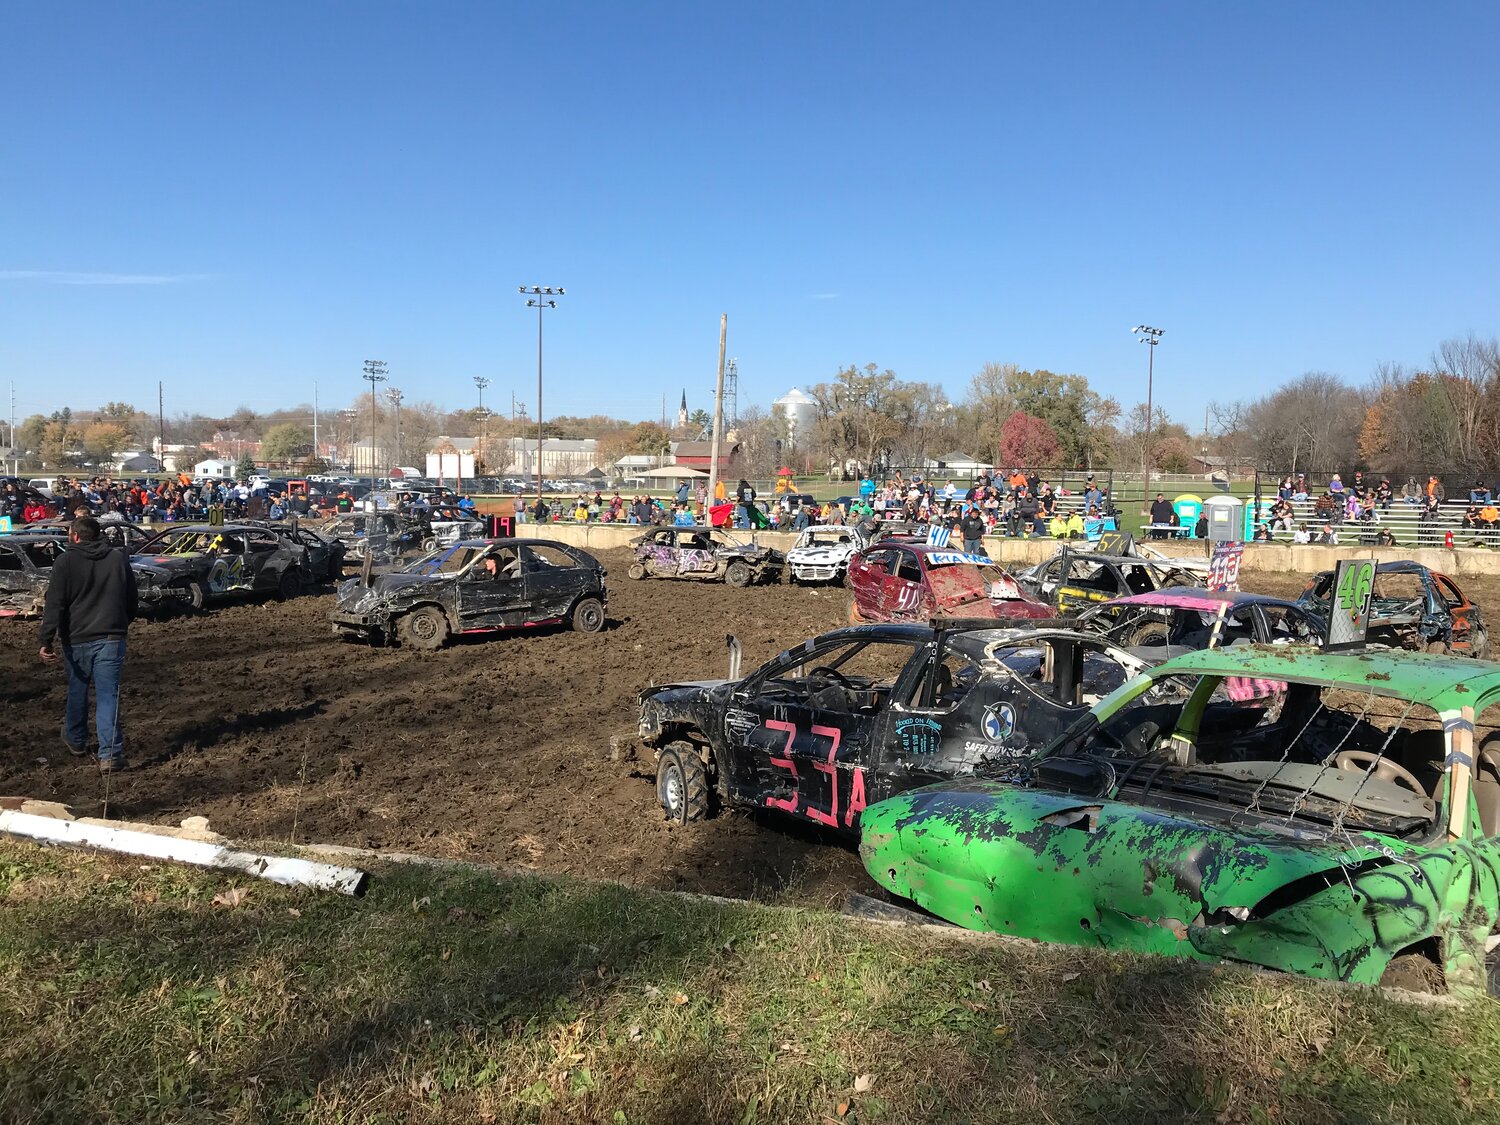 Saturday was sunny and calm, attracting a good crowd for the RACC Demo Derby in Riverside.